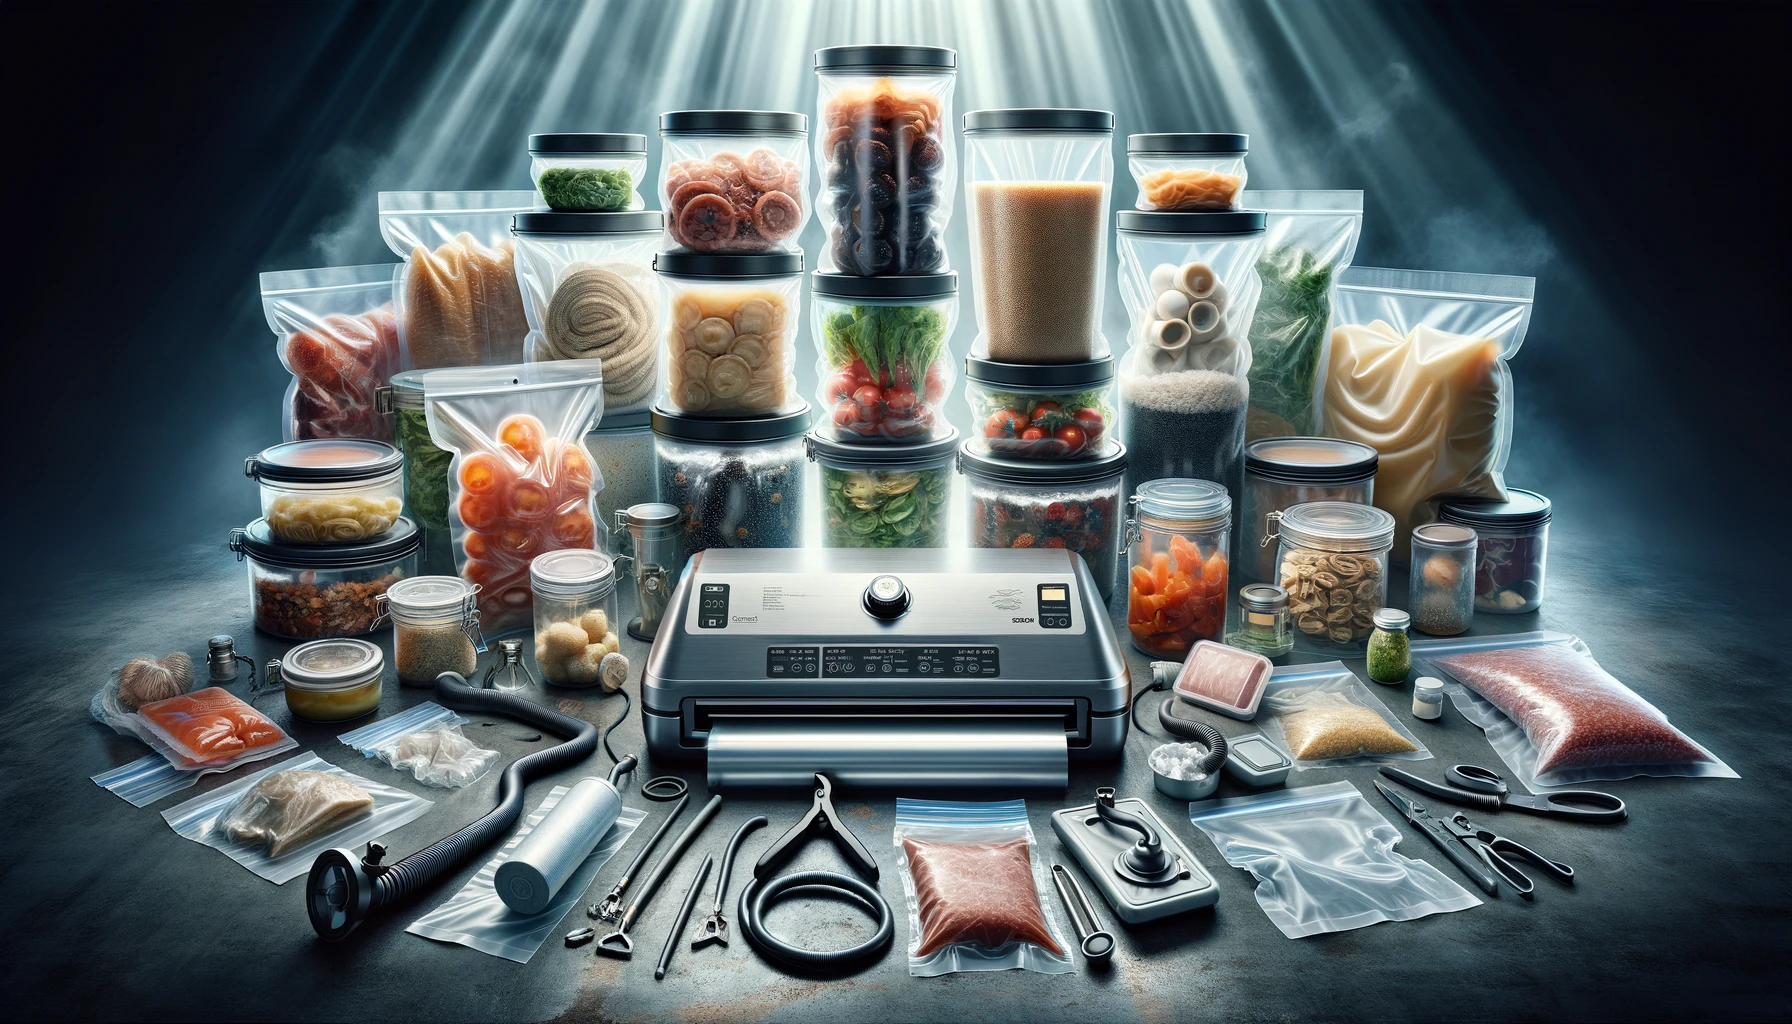 Dynamic display of essential vacuum sealer accessories for preppers, including various bags, specialized containers, attachment hoses, and oxygen absorbers, all arranged around a vacuum sealer to showcase their role in enhancing the food preservation process. The scene emphasizes practicality and efficiency, with each accessory lit to capture attention and detail